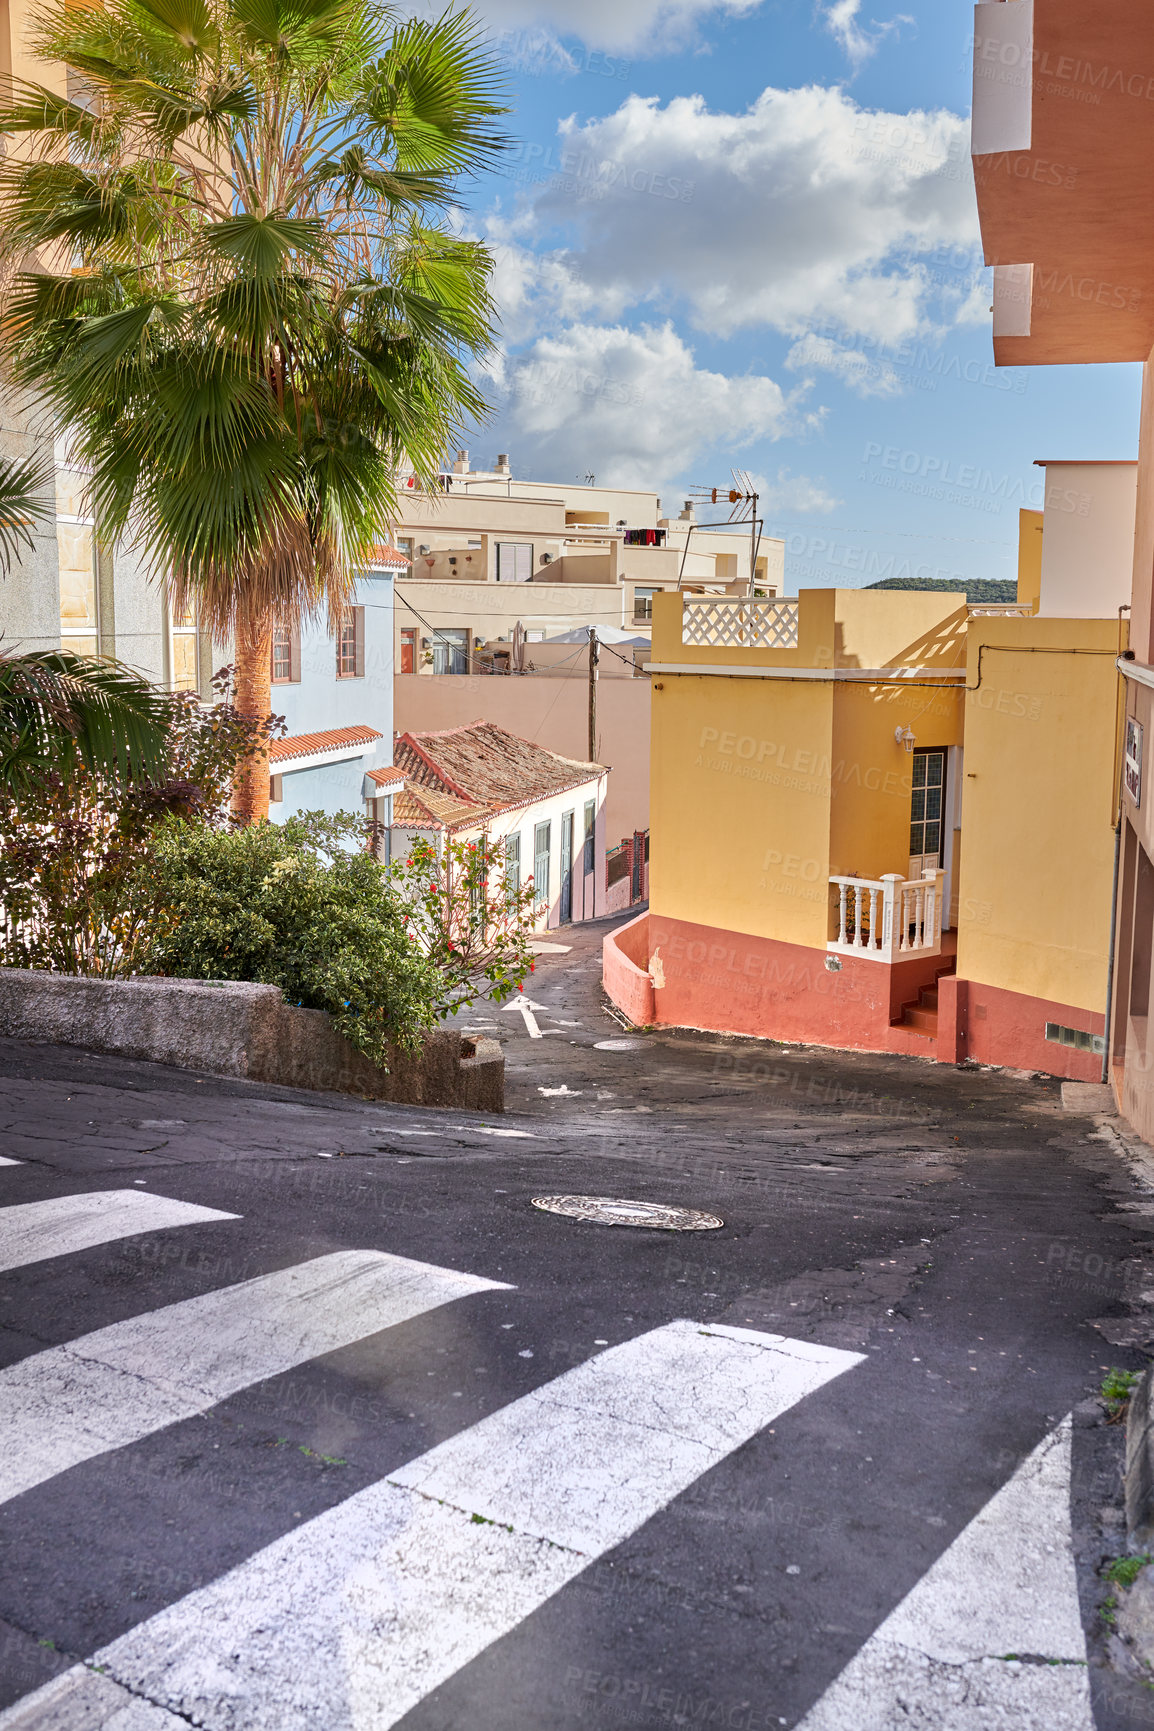 Buy stock photo A winding road with traditional architecture in 
Santa Cruz de La Palma. Quiet, empty street in a small European tourist city. A narrow alleyway in a rural town with colorful buildings and houses. 